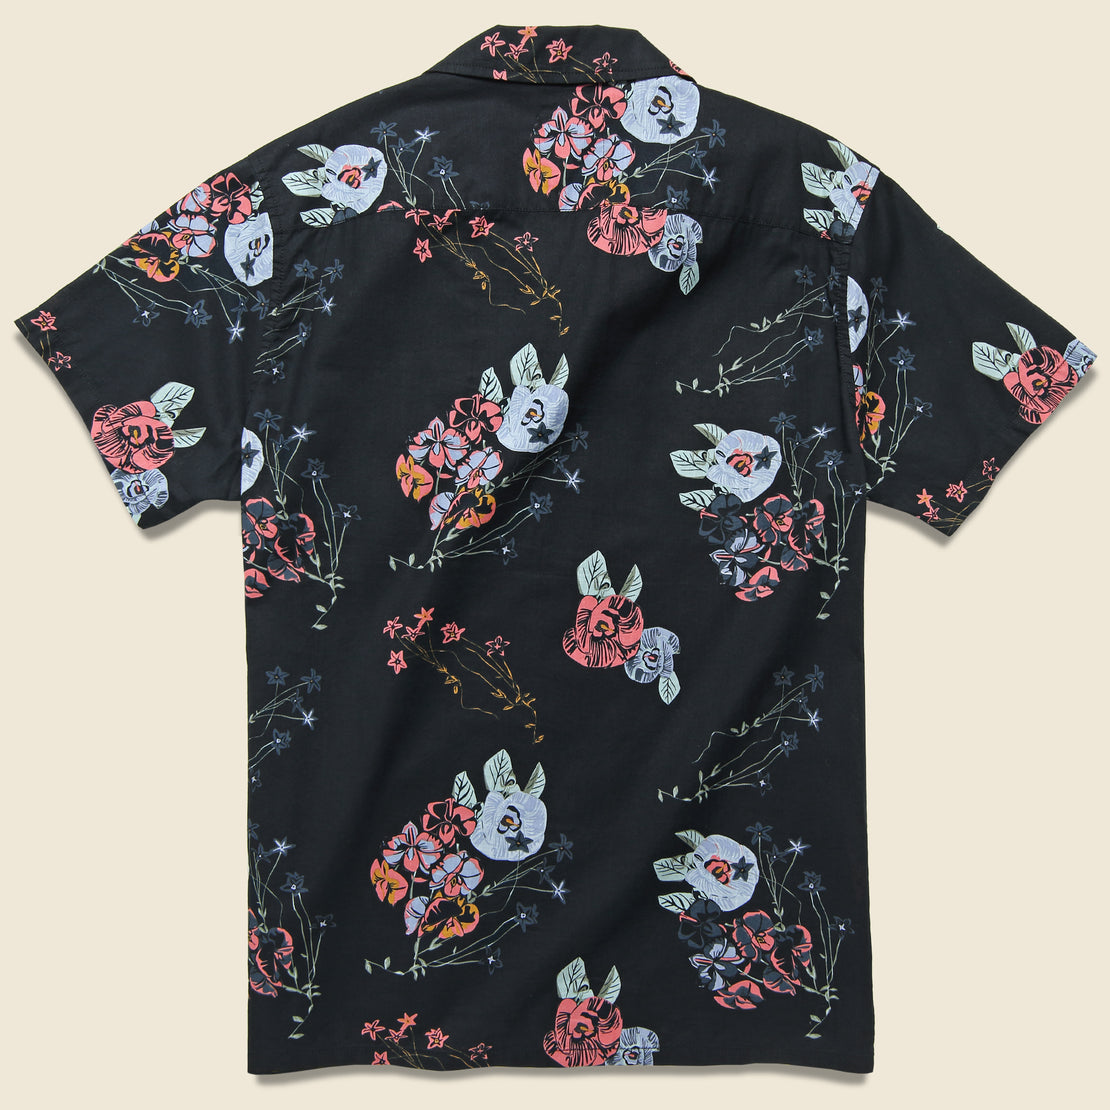 Royal Botanical Shirt - Black - Life After Denim - STAG Provisions - Tops - S/S Woven - Floral